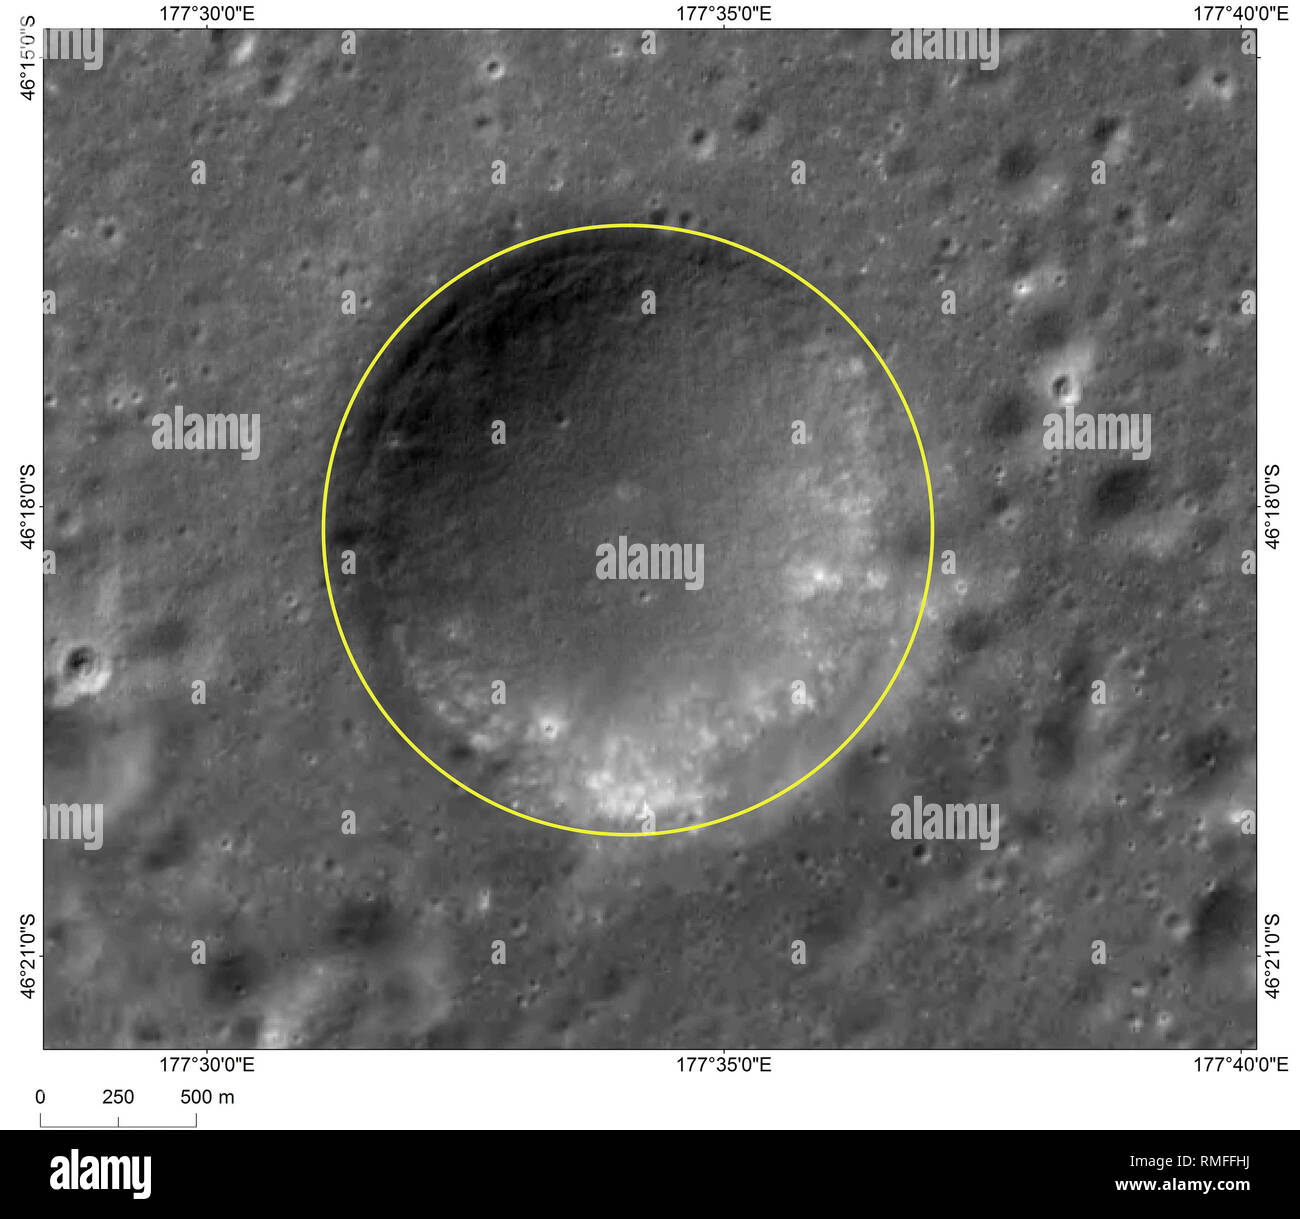 (190215) -- BEIJING, Feb. 15, 2019 (Xinhua) --     Photo provided by the China National Space Administration (CNSA) shows the image of Hegu, a crater near 'Statio Tianhe', the landing site of China's Chang'e-4 lunar probe.     The landing site of China's Chang'e-4 lunar probe has been named 'Statio Tianhe' after the spacecraft made the first-ever soft landing on the far side of the moon last month.     Together with three nearby impact craters and one hill, the name was approved by the International Astronomical Union (IAU), Liu Jizhong, director of the China Lunar Exploration and Space Engine Stock Photo